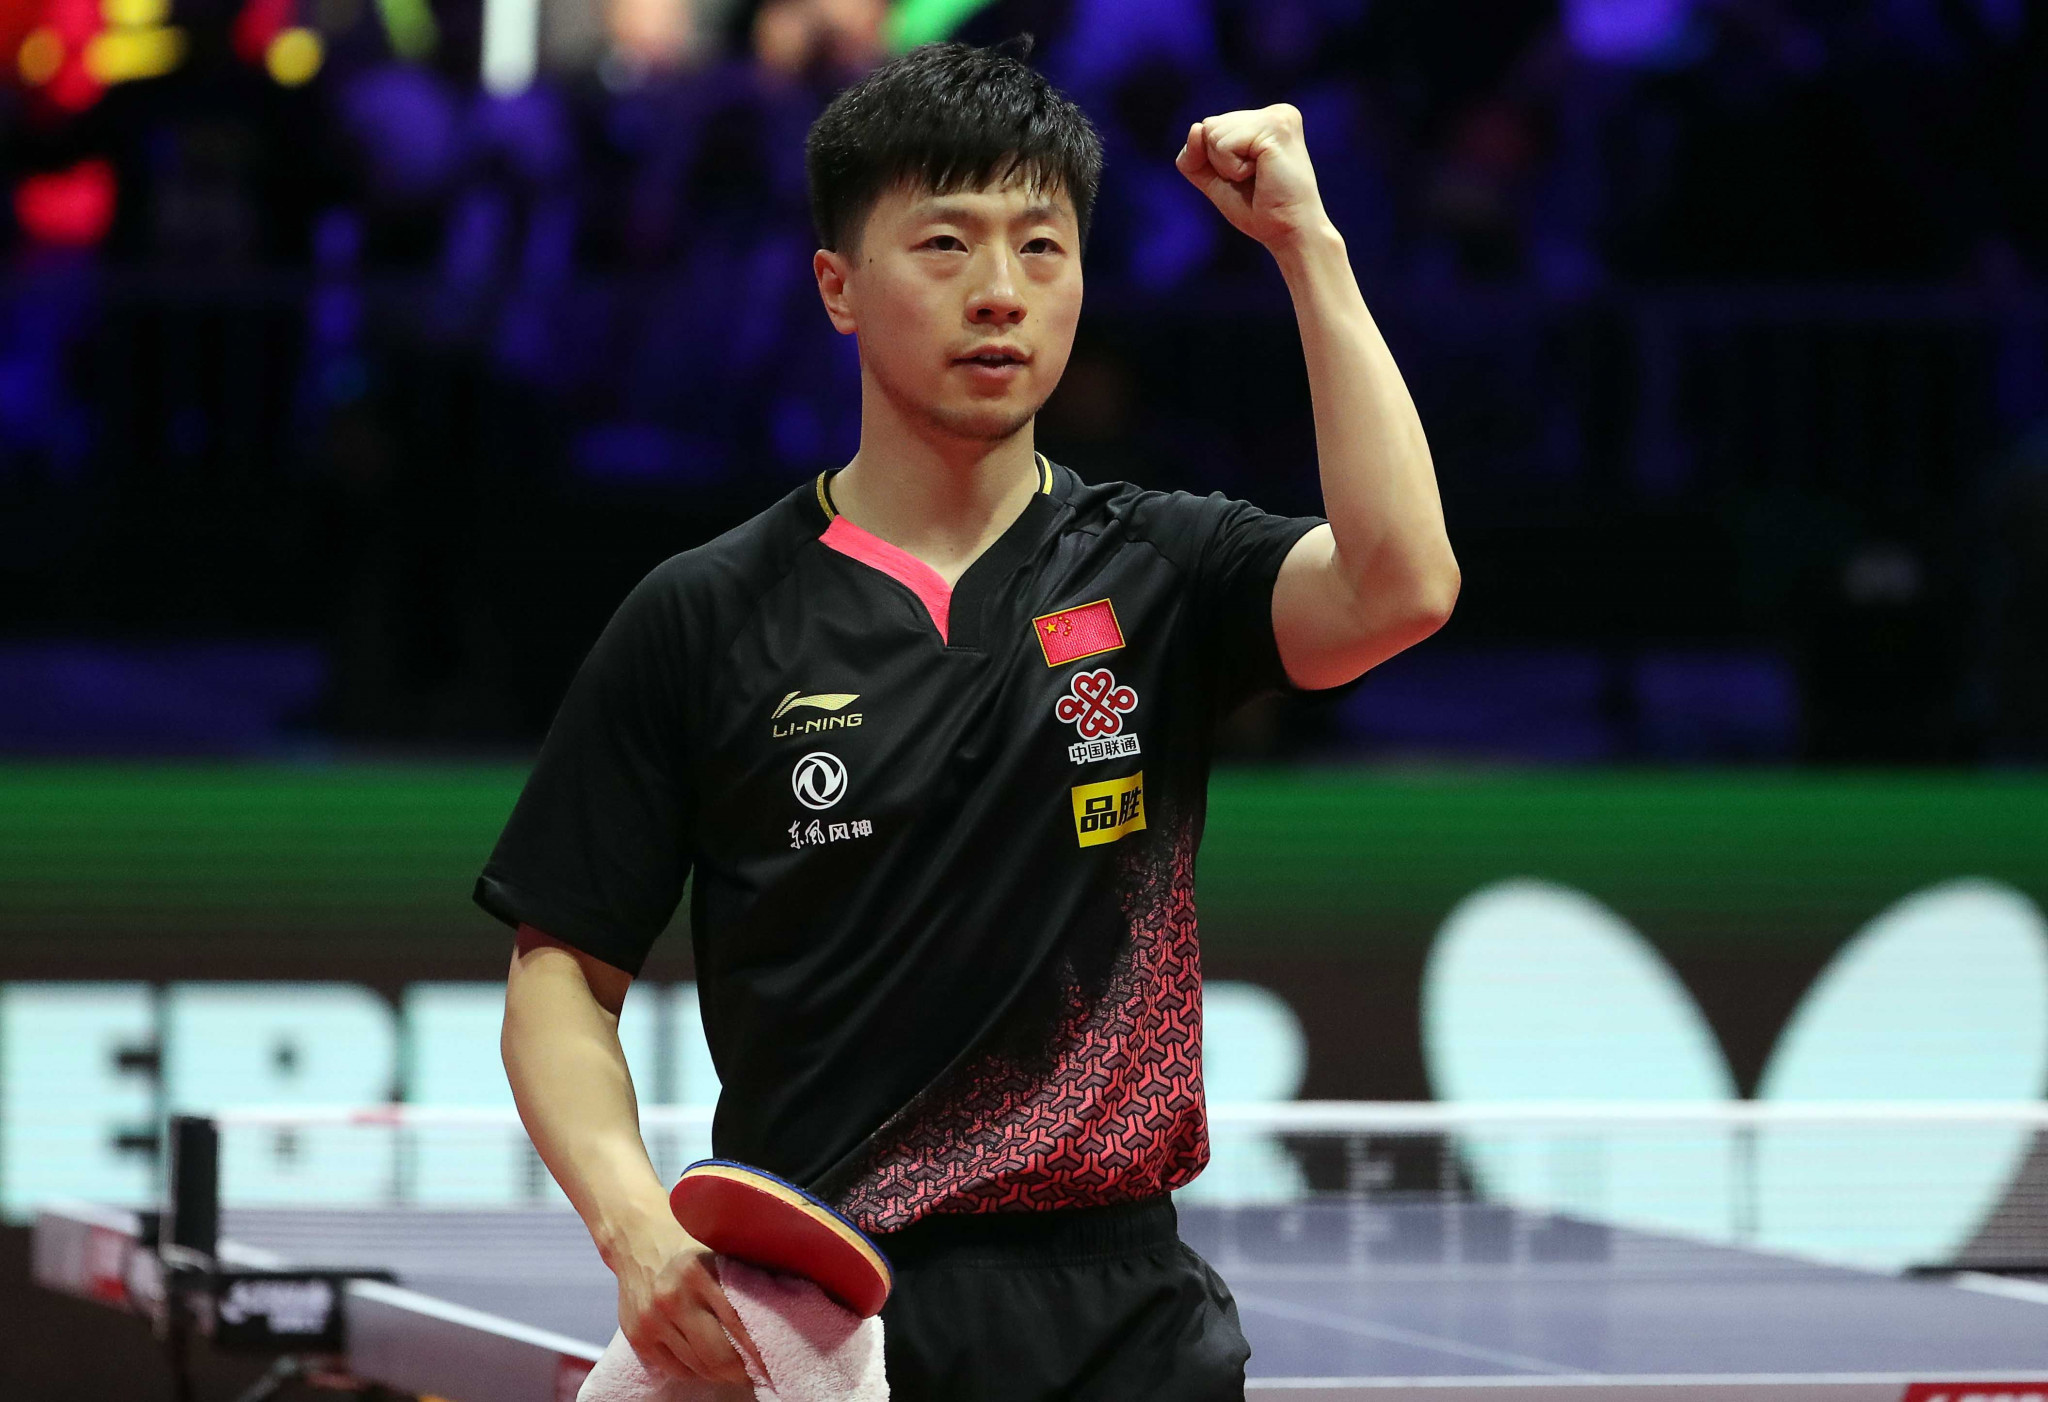 ITTF confirms November dates for World Table Tennis Championships in